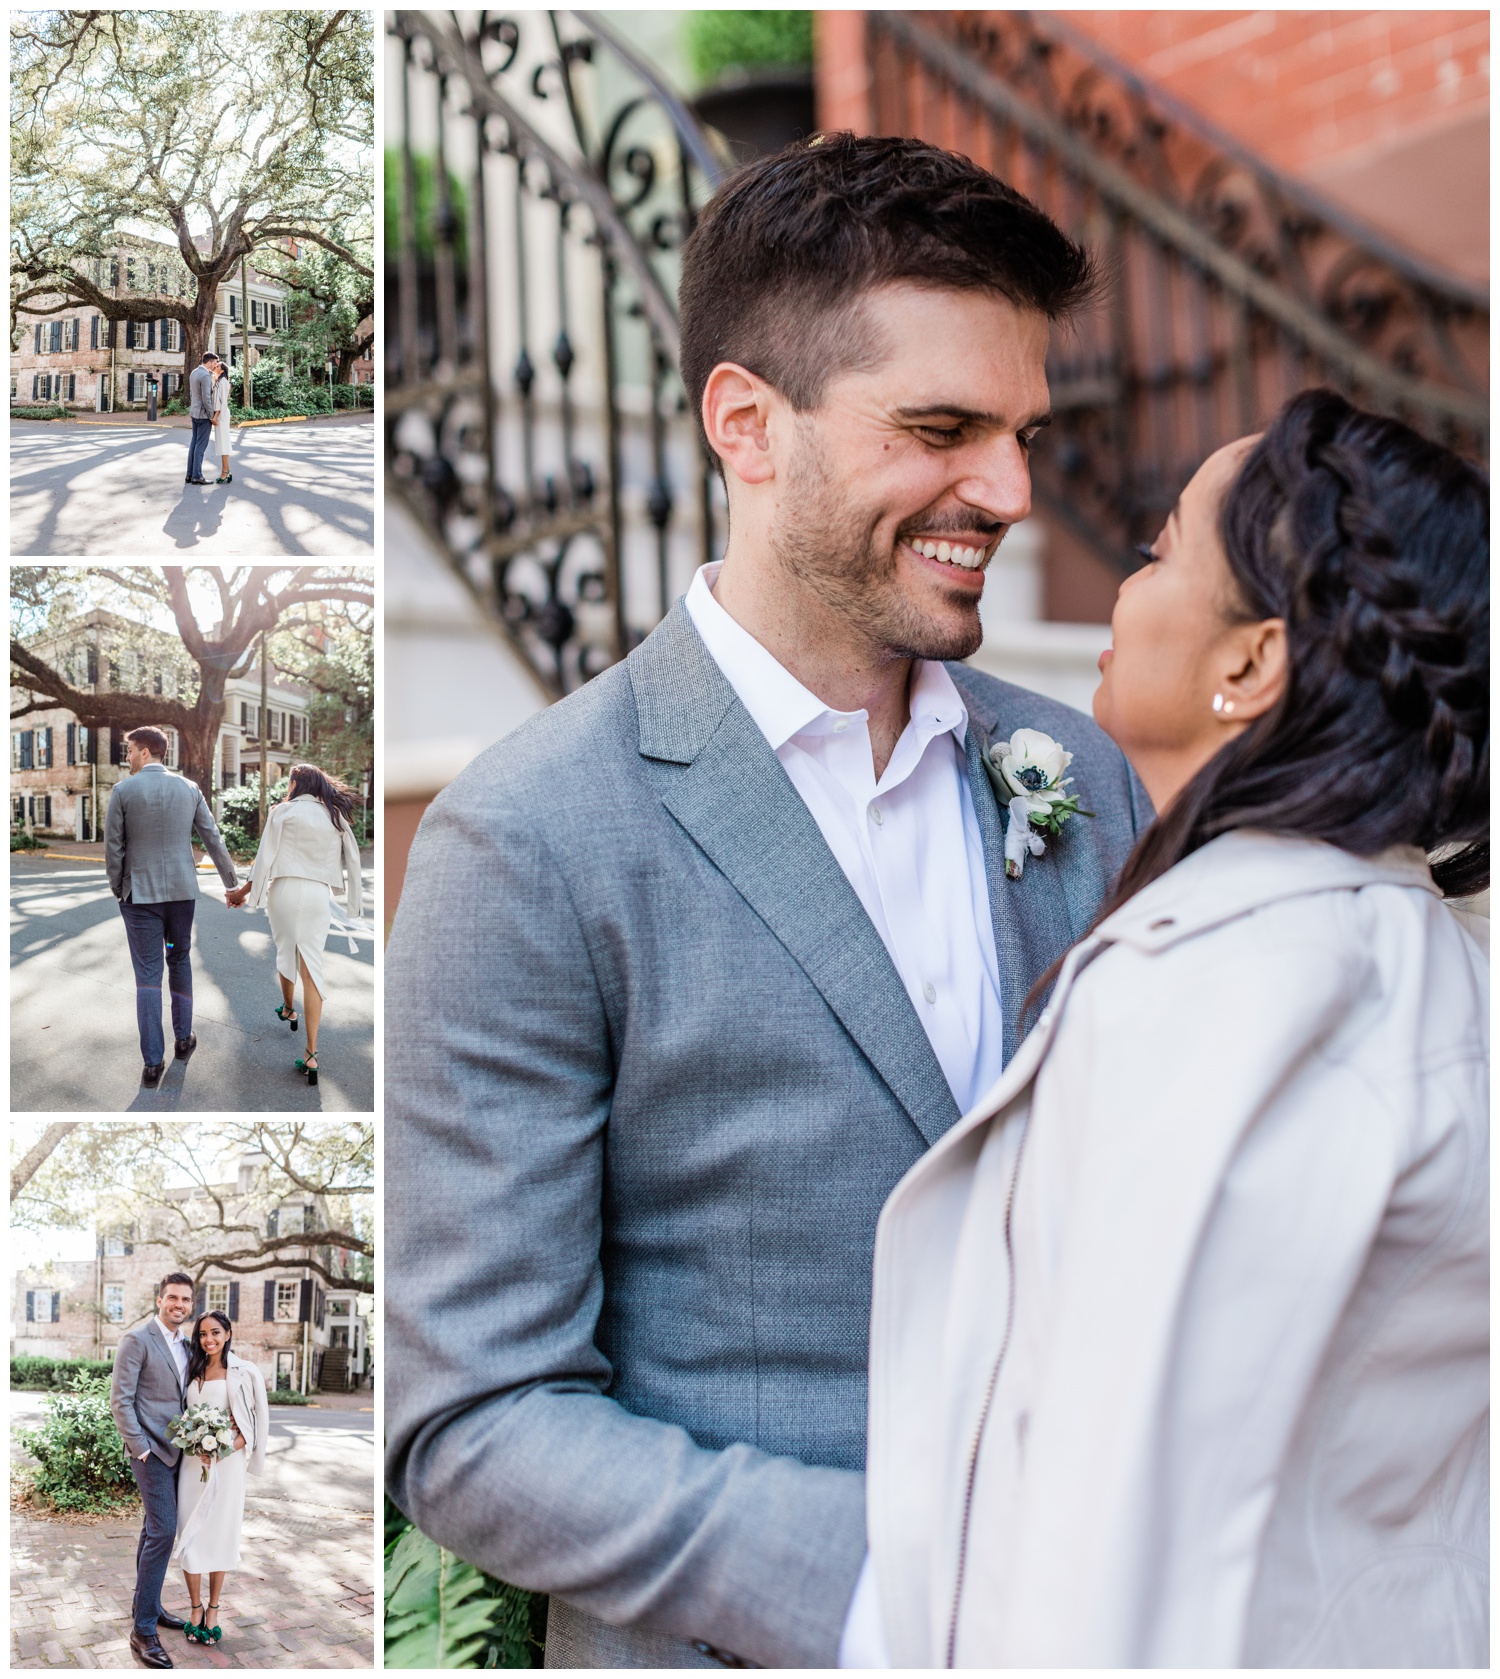 couples photos - the savannah elopement package - flowers by ivory and beau